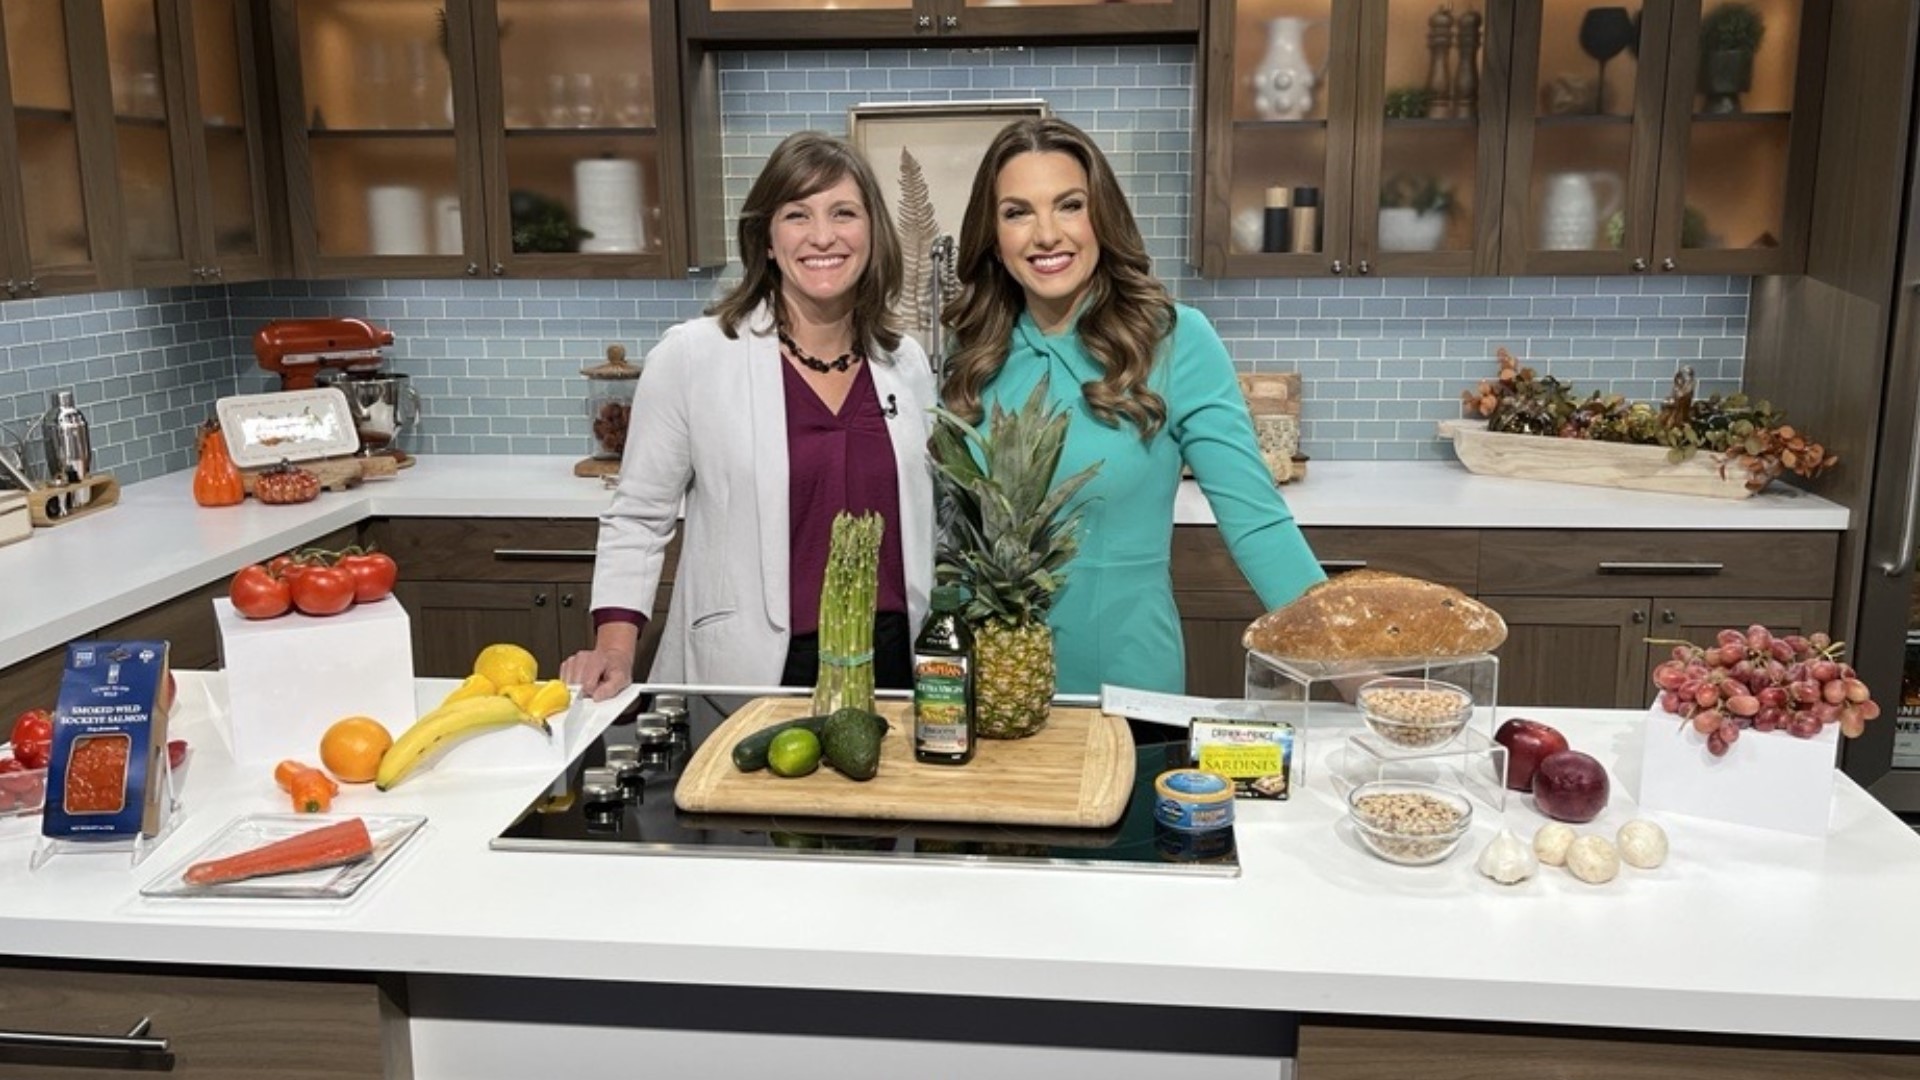 Physician Assistant Diana McFarlane explains the important connection between food and digestive health. Sponsored by Virginia Mason Franciscan Health.